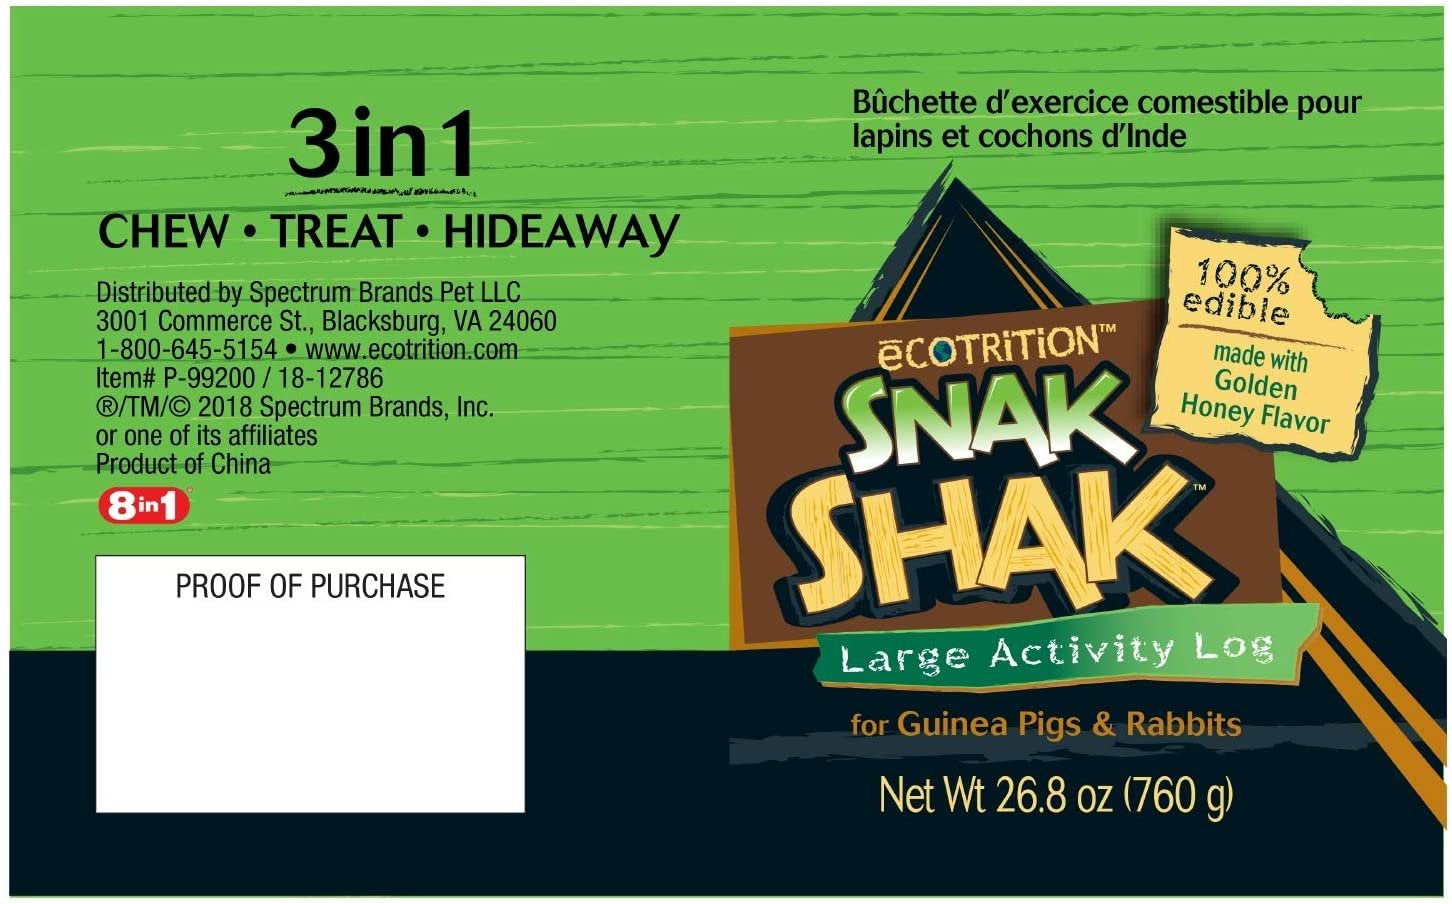 Ecotrition Snak Shak Edible Hideaway for Hamsters, Gerbils, Mice and Small Animals, 3-In-1 Chew Treat and Hideaway Animals & Pet Supplies > Pet Supplies > Small Animal Supplies > Small Animal Treats Ecotrition   